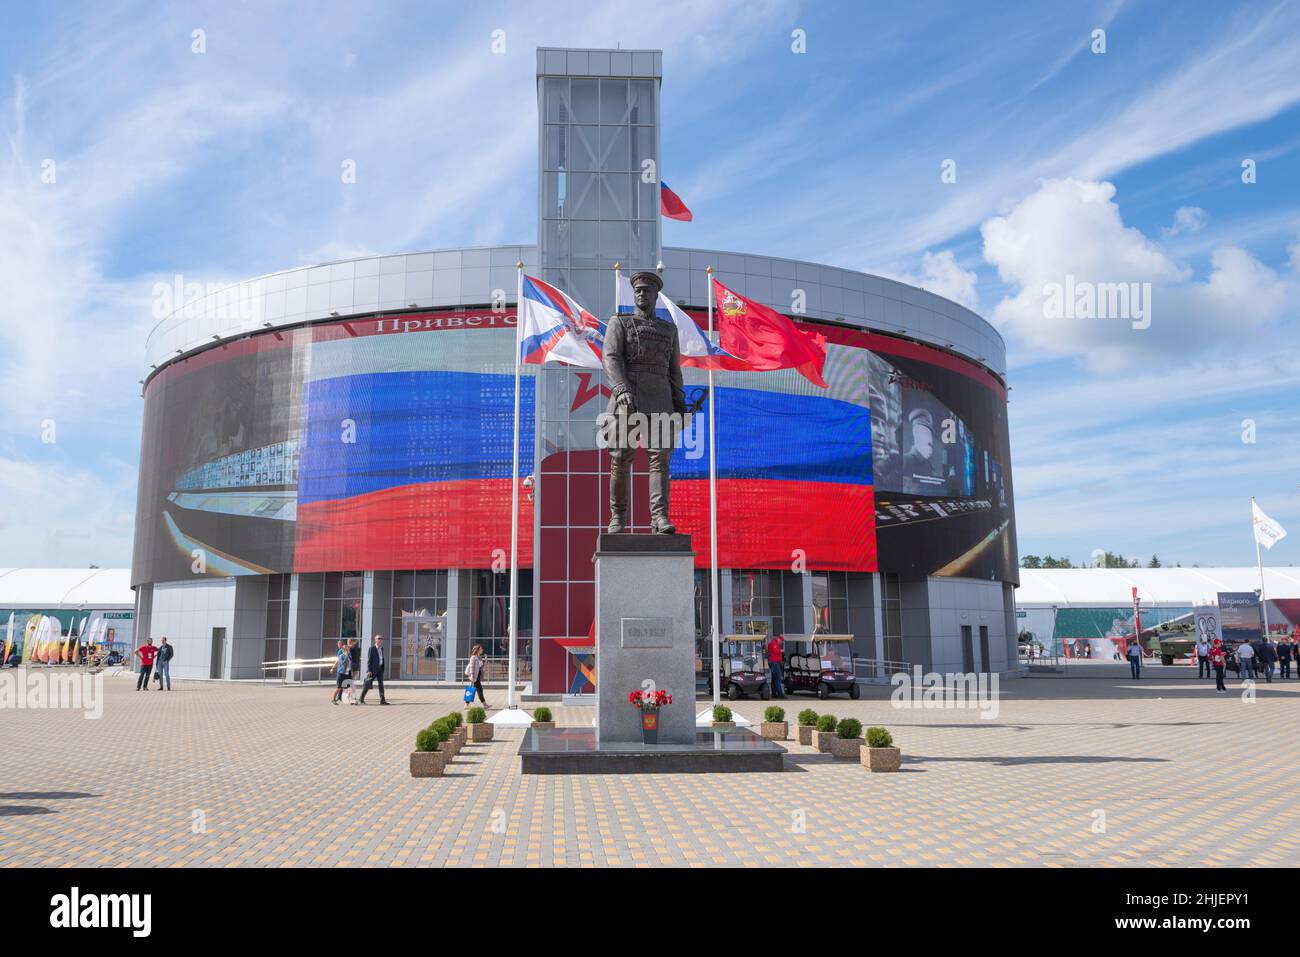 MOSCOW REGION, RUSSIA - AUGUST 25, 2020: View of the monument to Soviet Marshal I.S. Konev on a sunny August day. Patriot Park Stock Photo